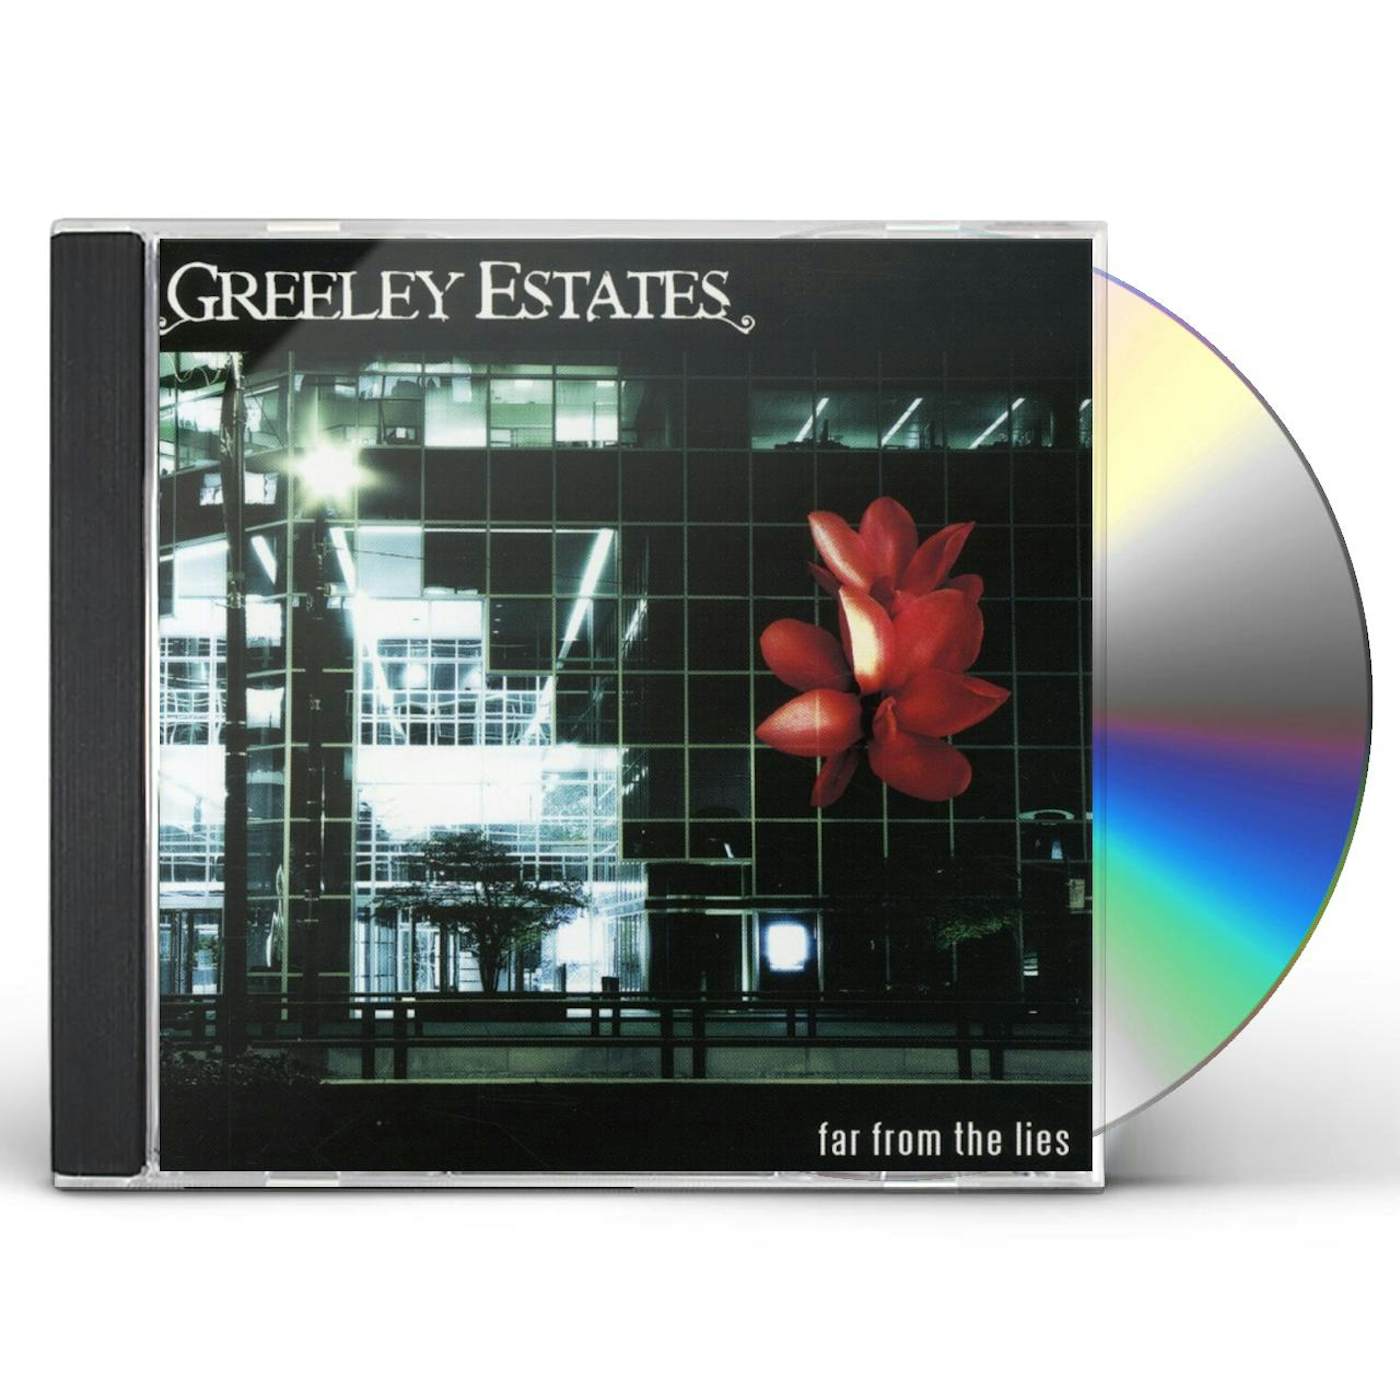 Greeley Estates FAR FROM THE LIES CD